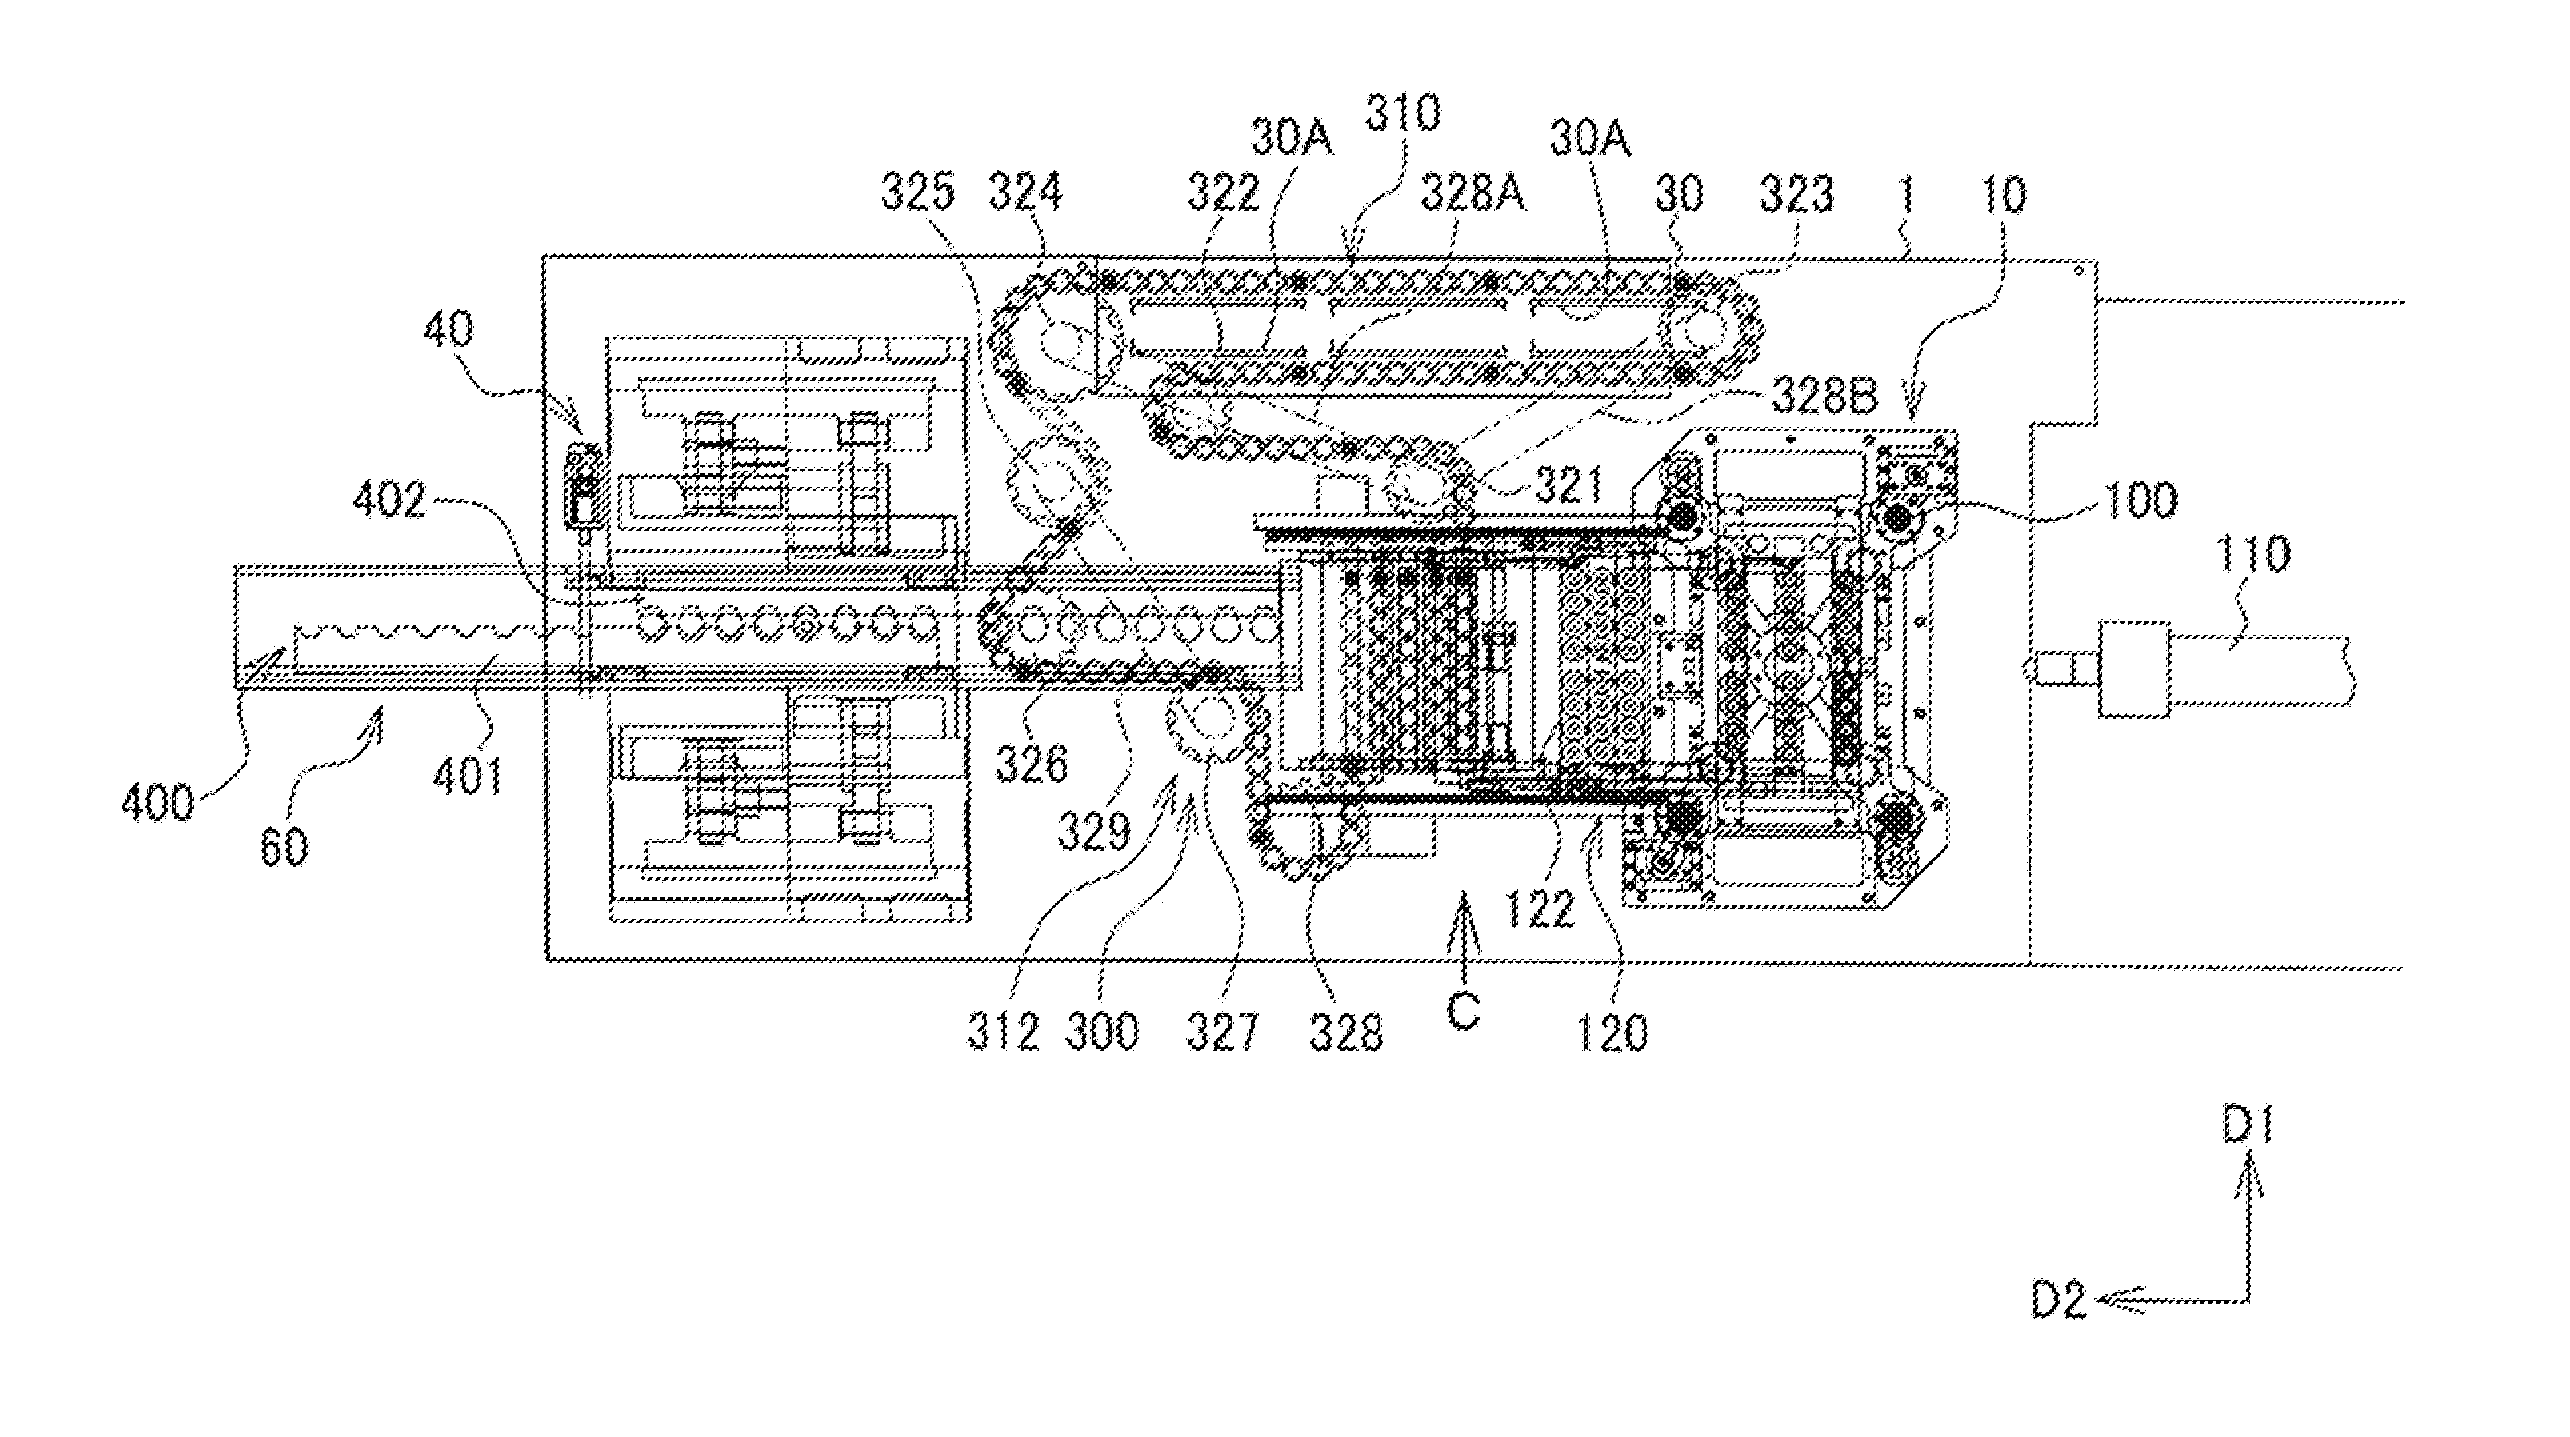 Injection stretch blow molding device and molded part heating device